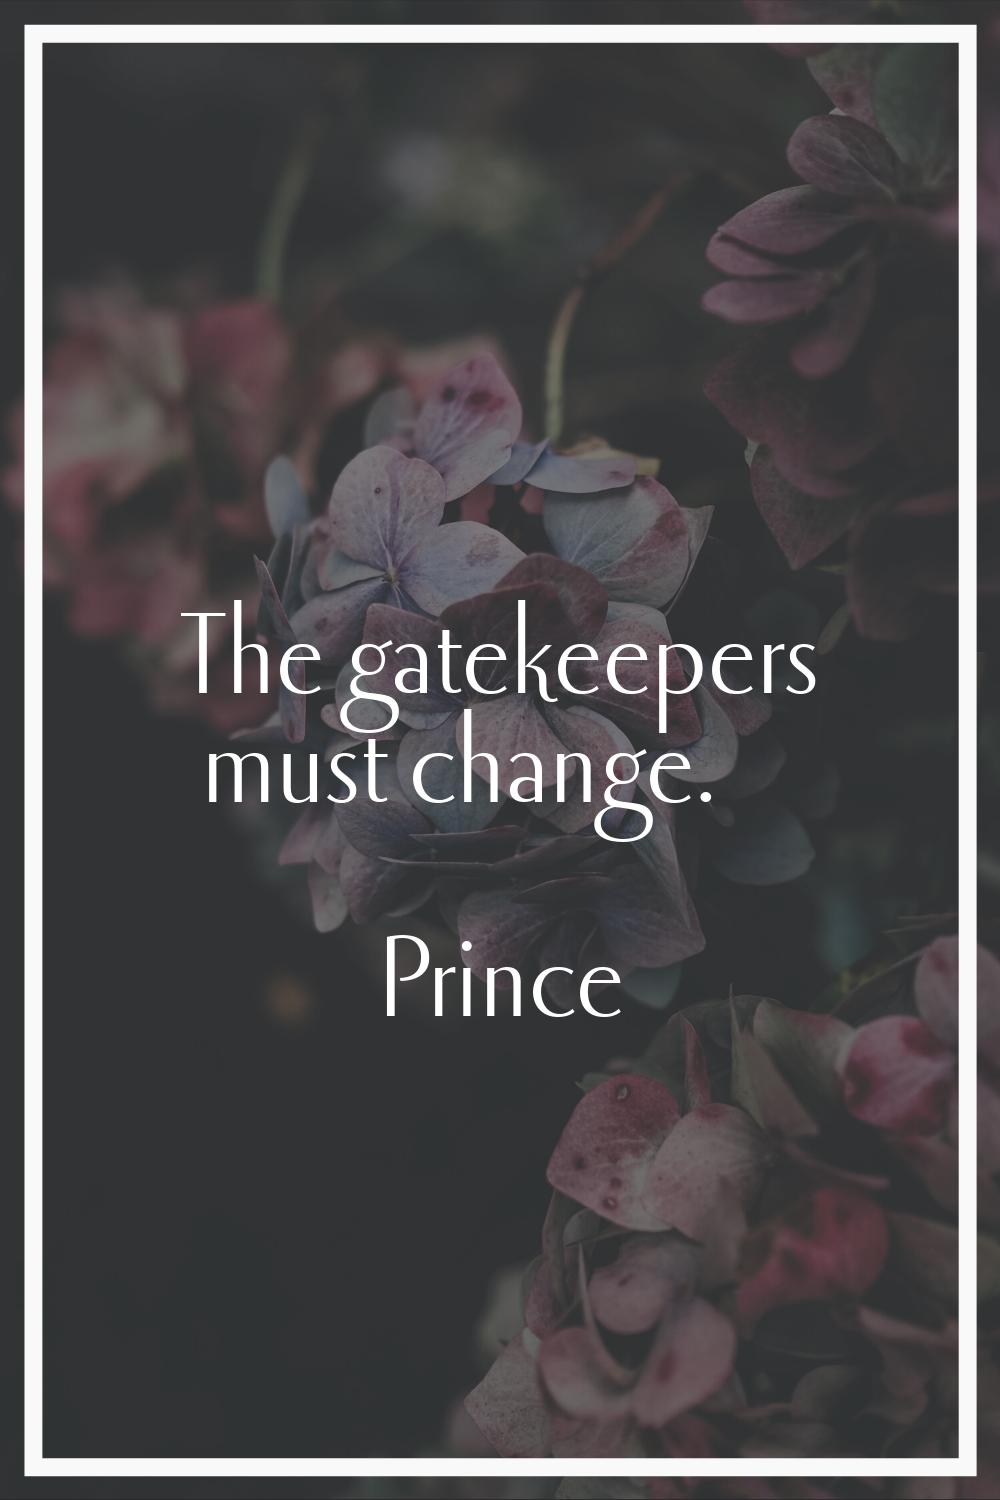 The gatekeepers must change.